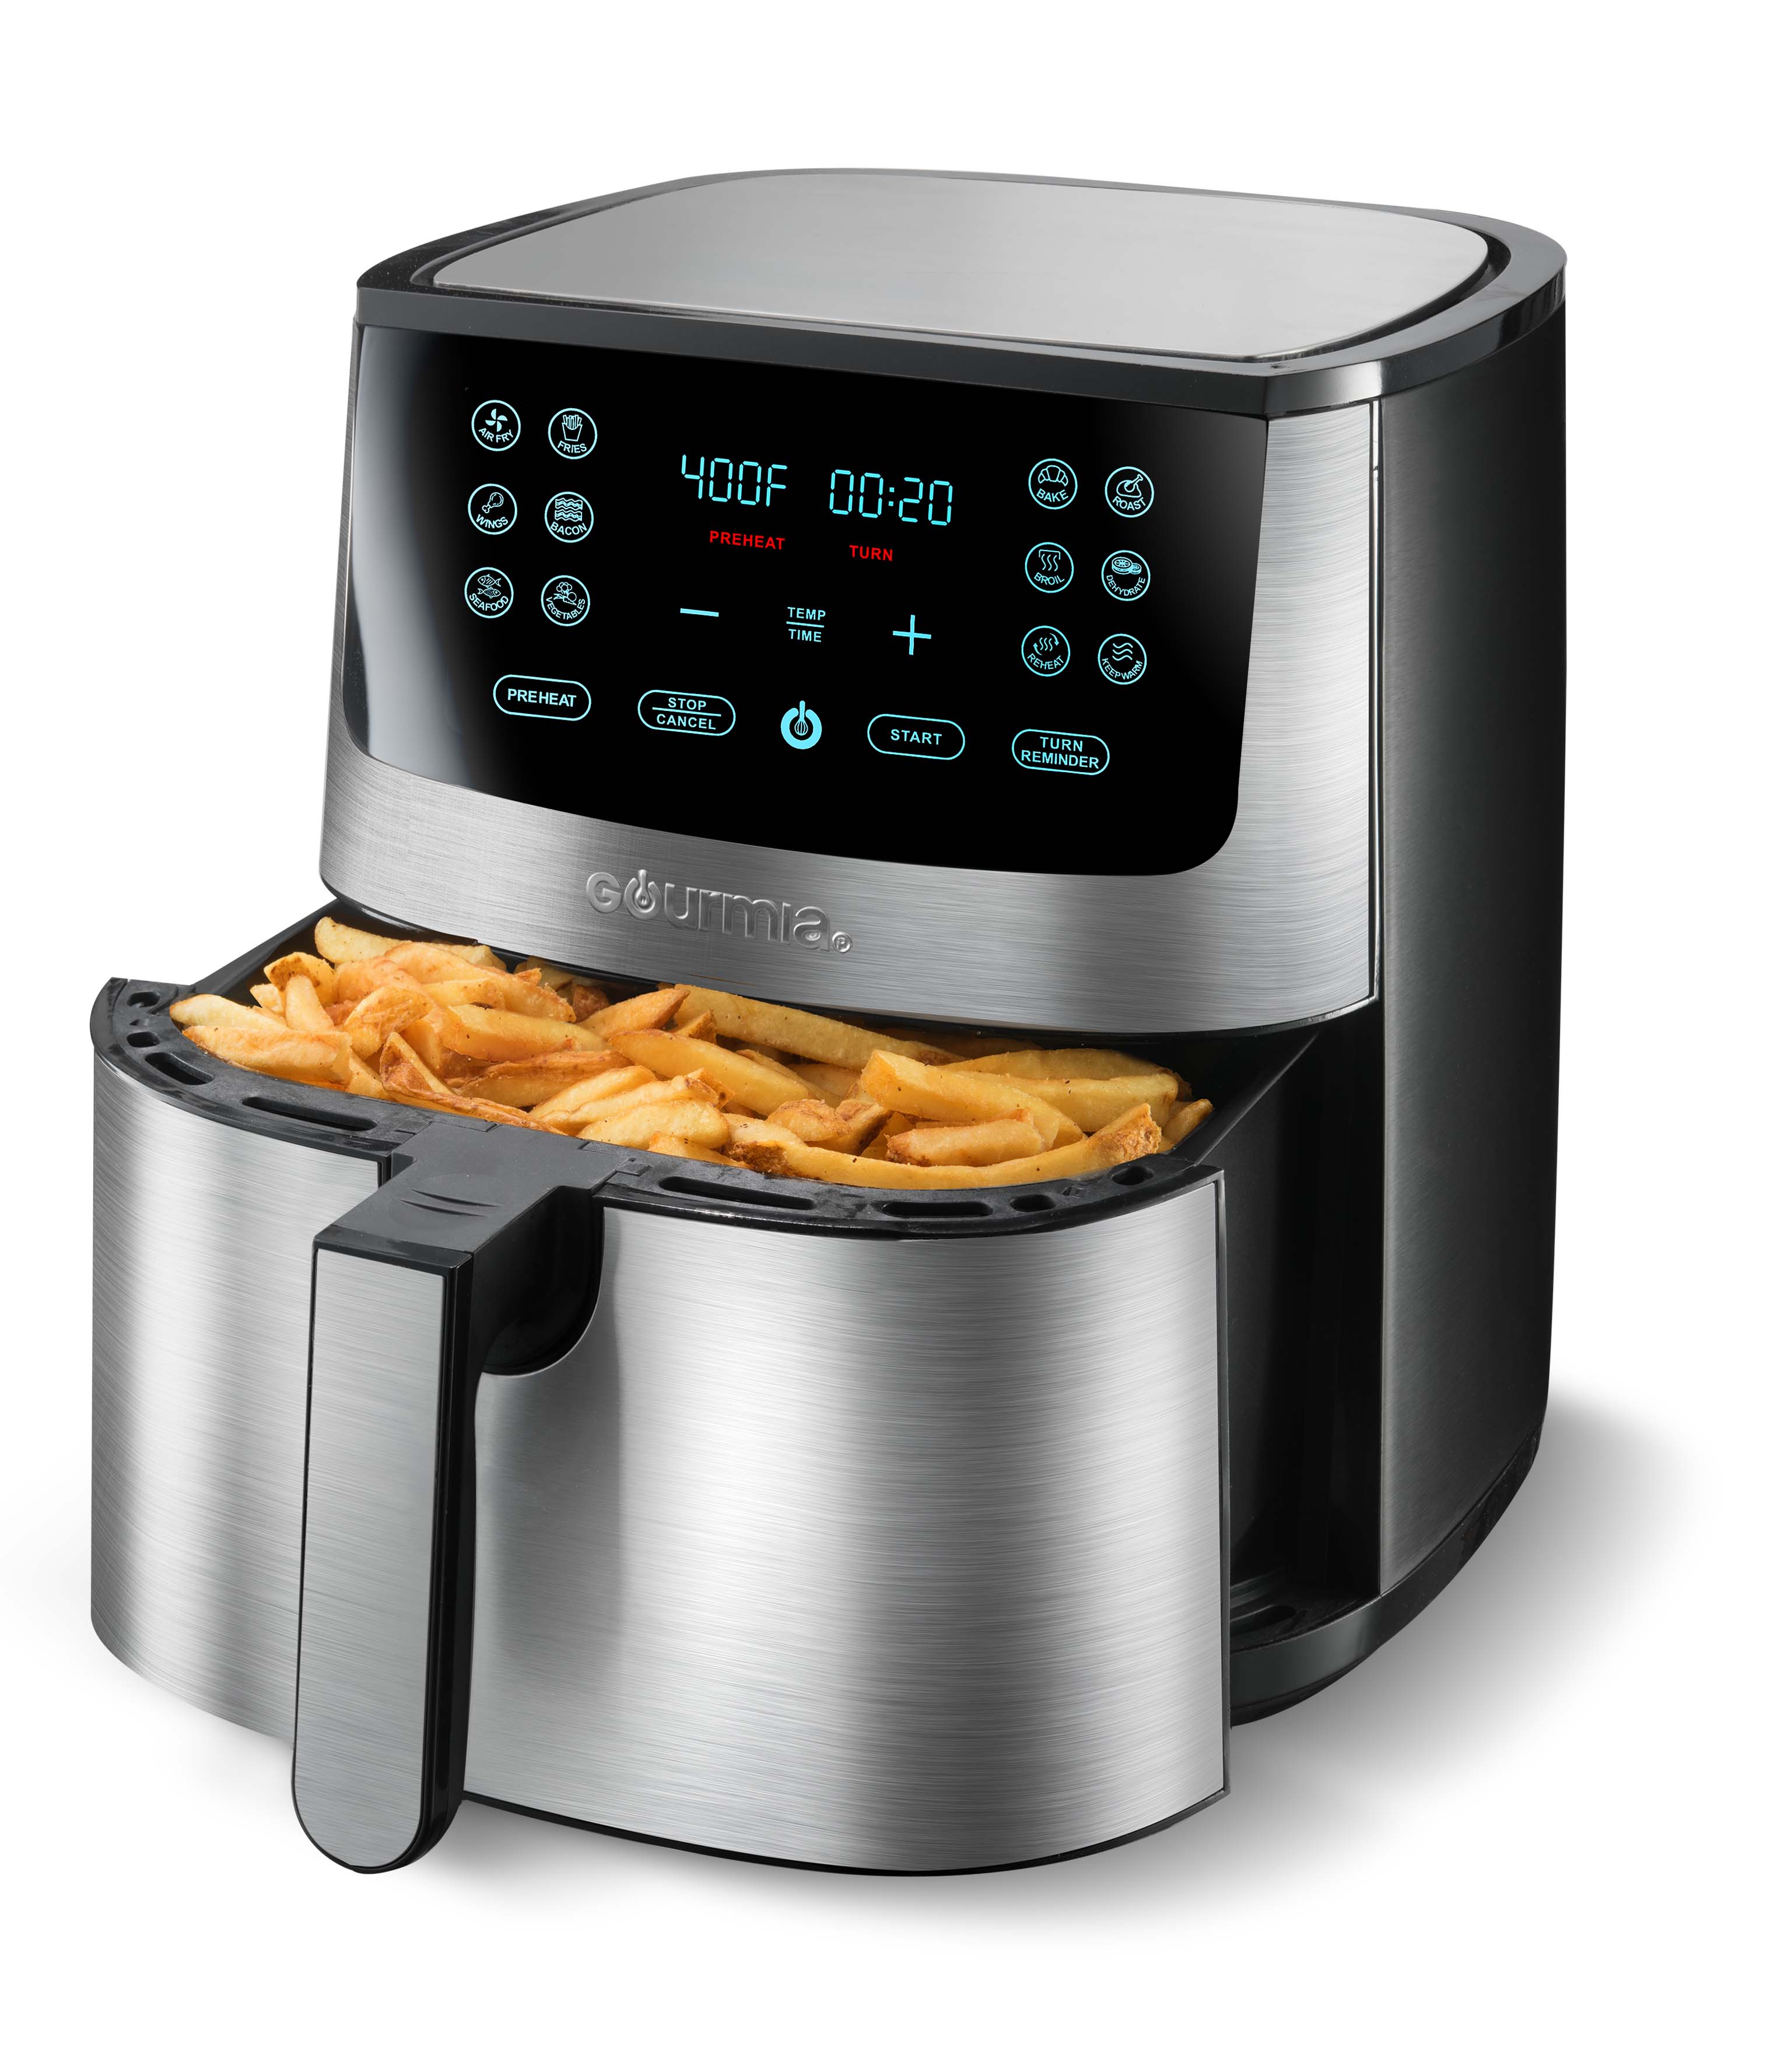 Gourmia 8-Qt Digital Air Fryer with Guided Cooking, Stainless Steel, 13.5 High, New - image 4 of 6